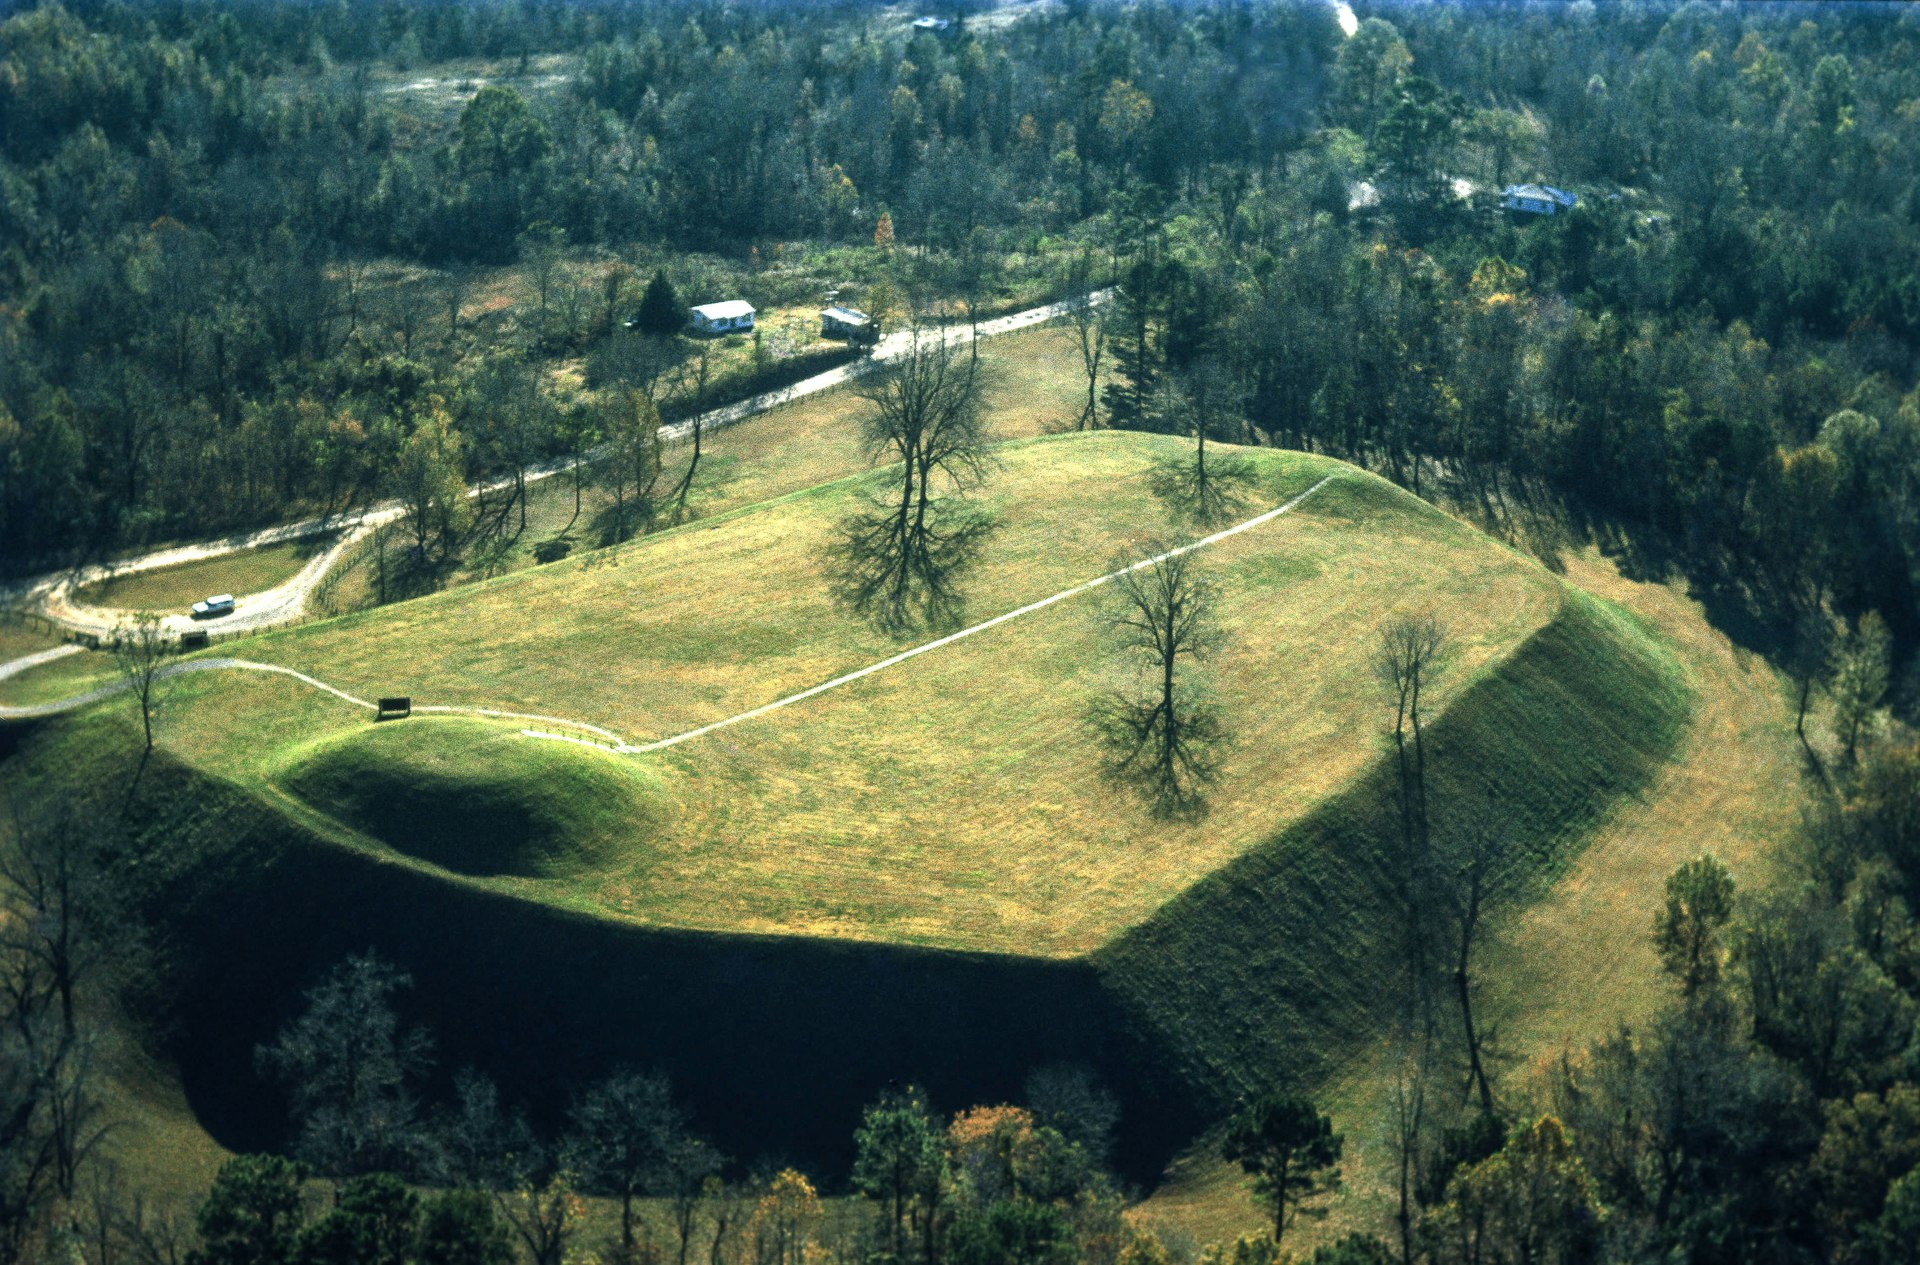 Emerald Mound, part of the second largest pre-Colombian earthwork in the USA.